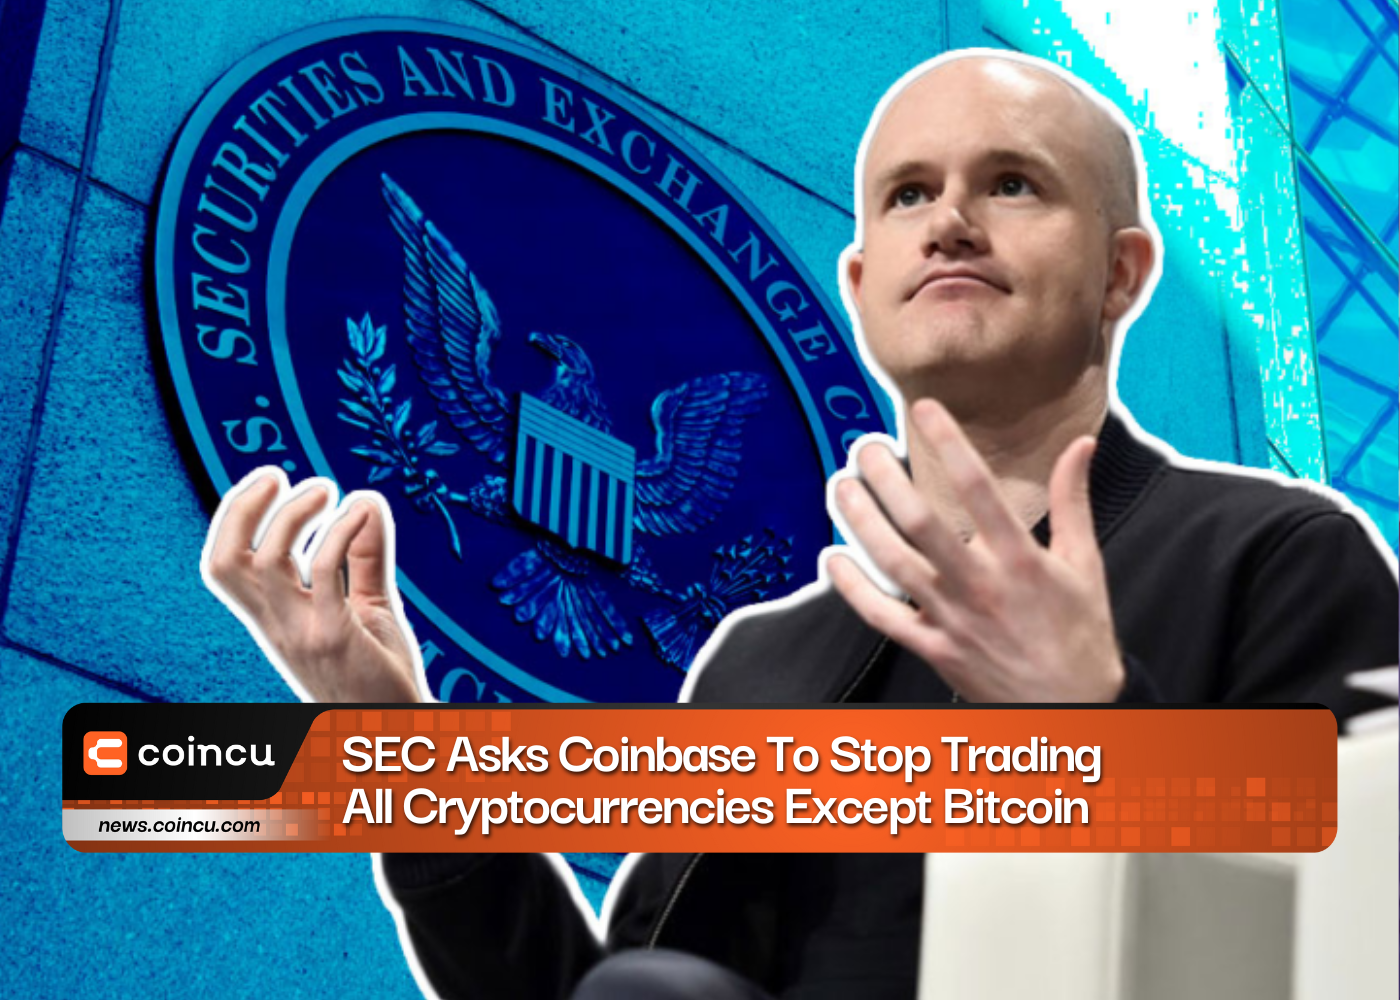 SEC Asks Coinbase To Stop Trading All Cryptocurrencies Except Bitcoin